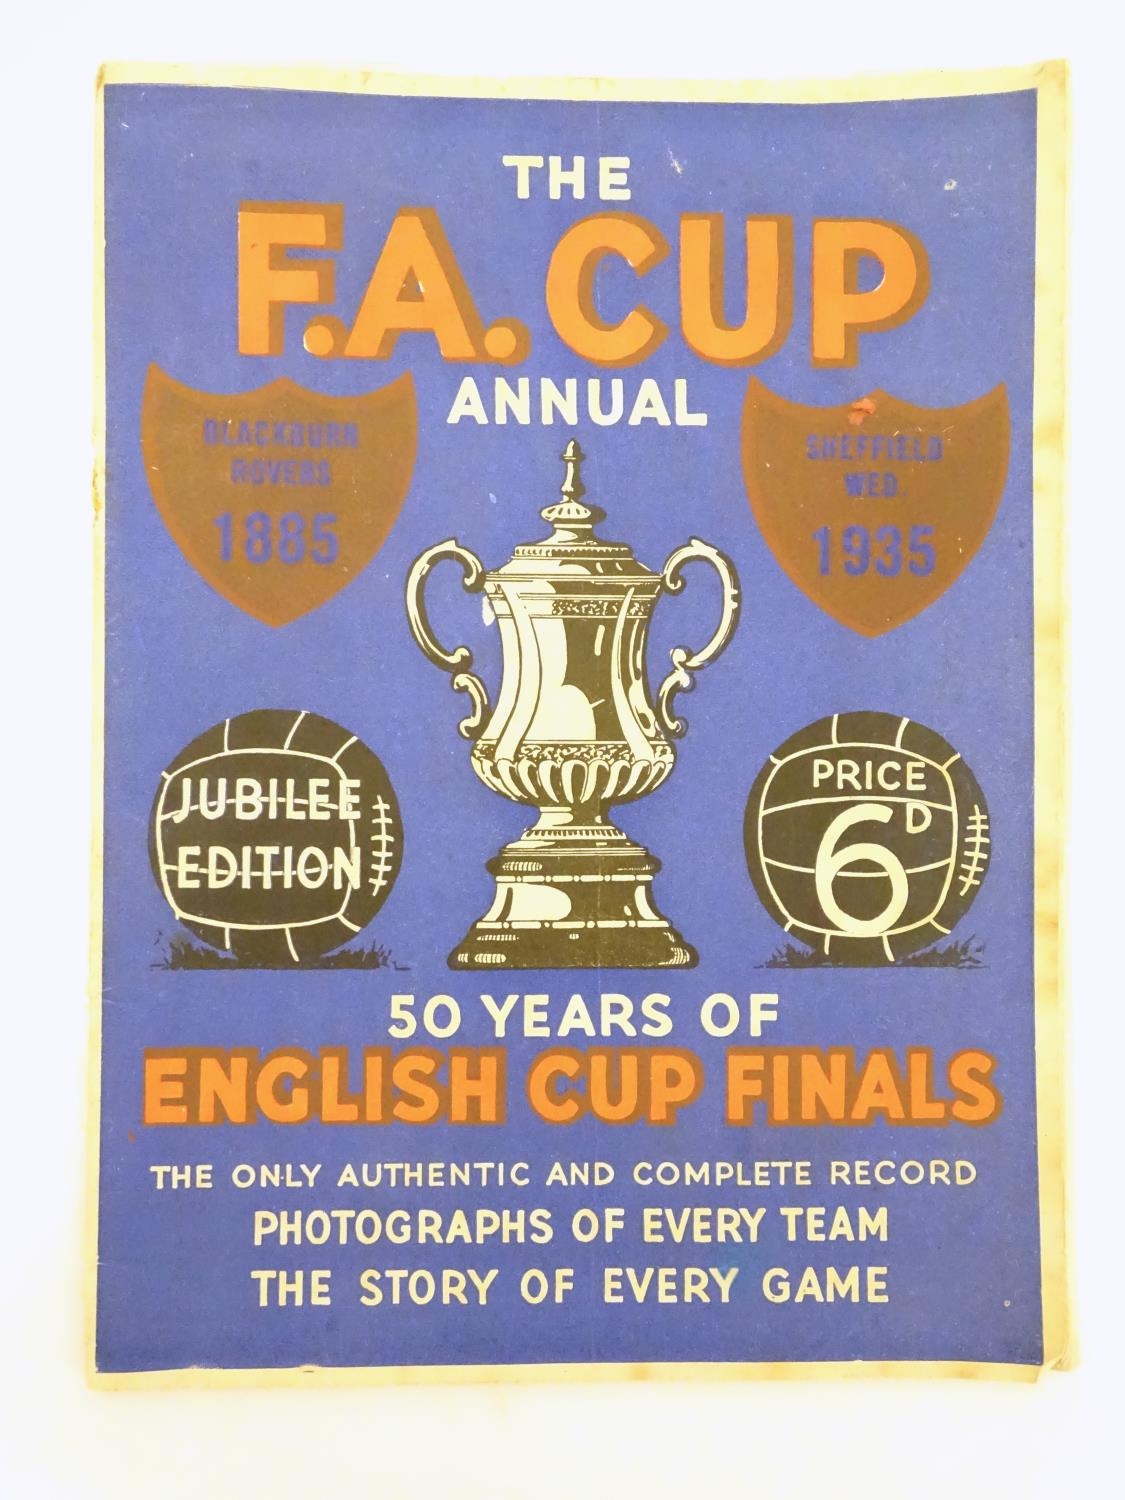 Book, sporting interest: The FA Cup Annual, King George V jubilee edition 1935, chronicling the - Image 3 of 7